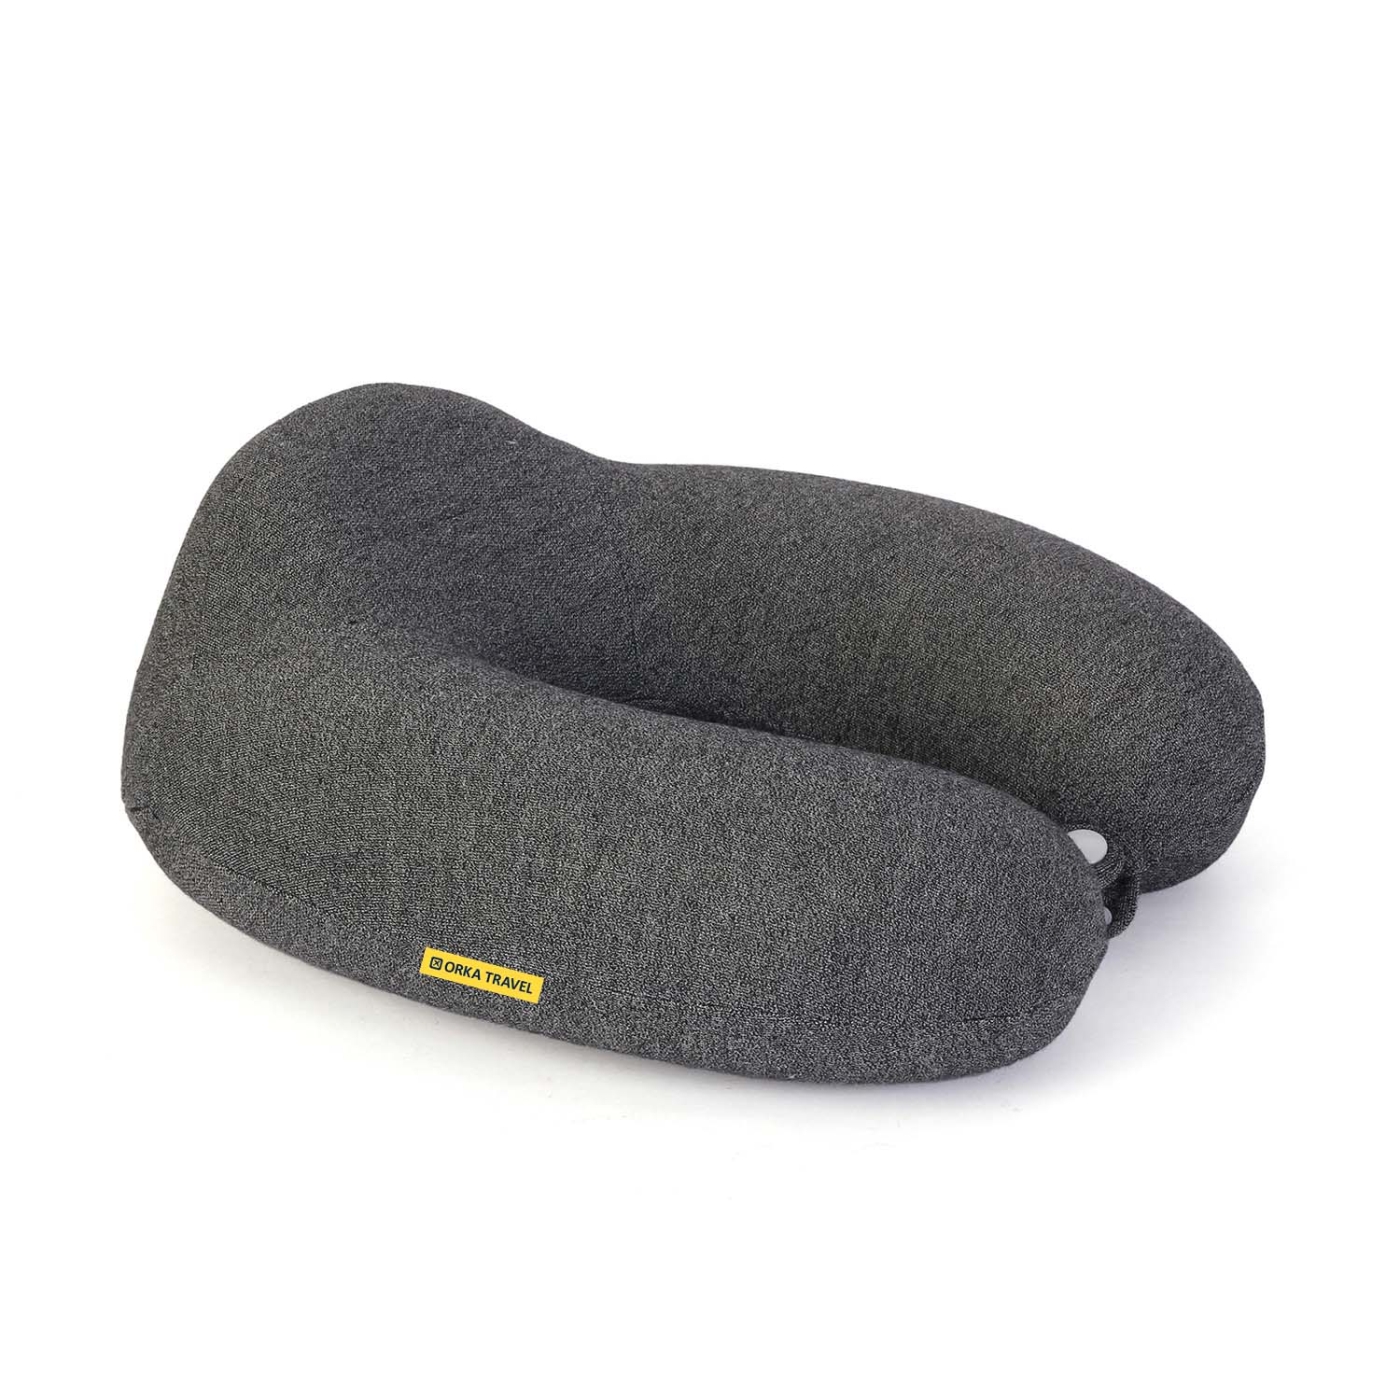 ORKA TRAVEL Solid Special Thermo Sensitive Memory Foam U Shaped Travel Neck Pillow - Dark Grey